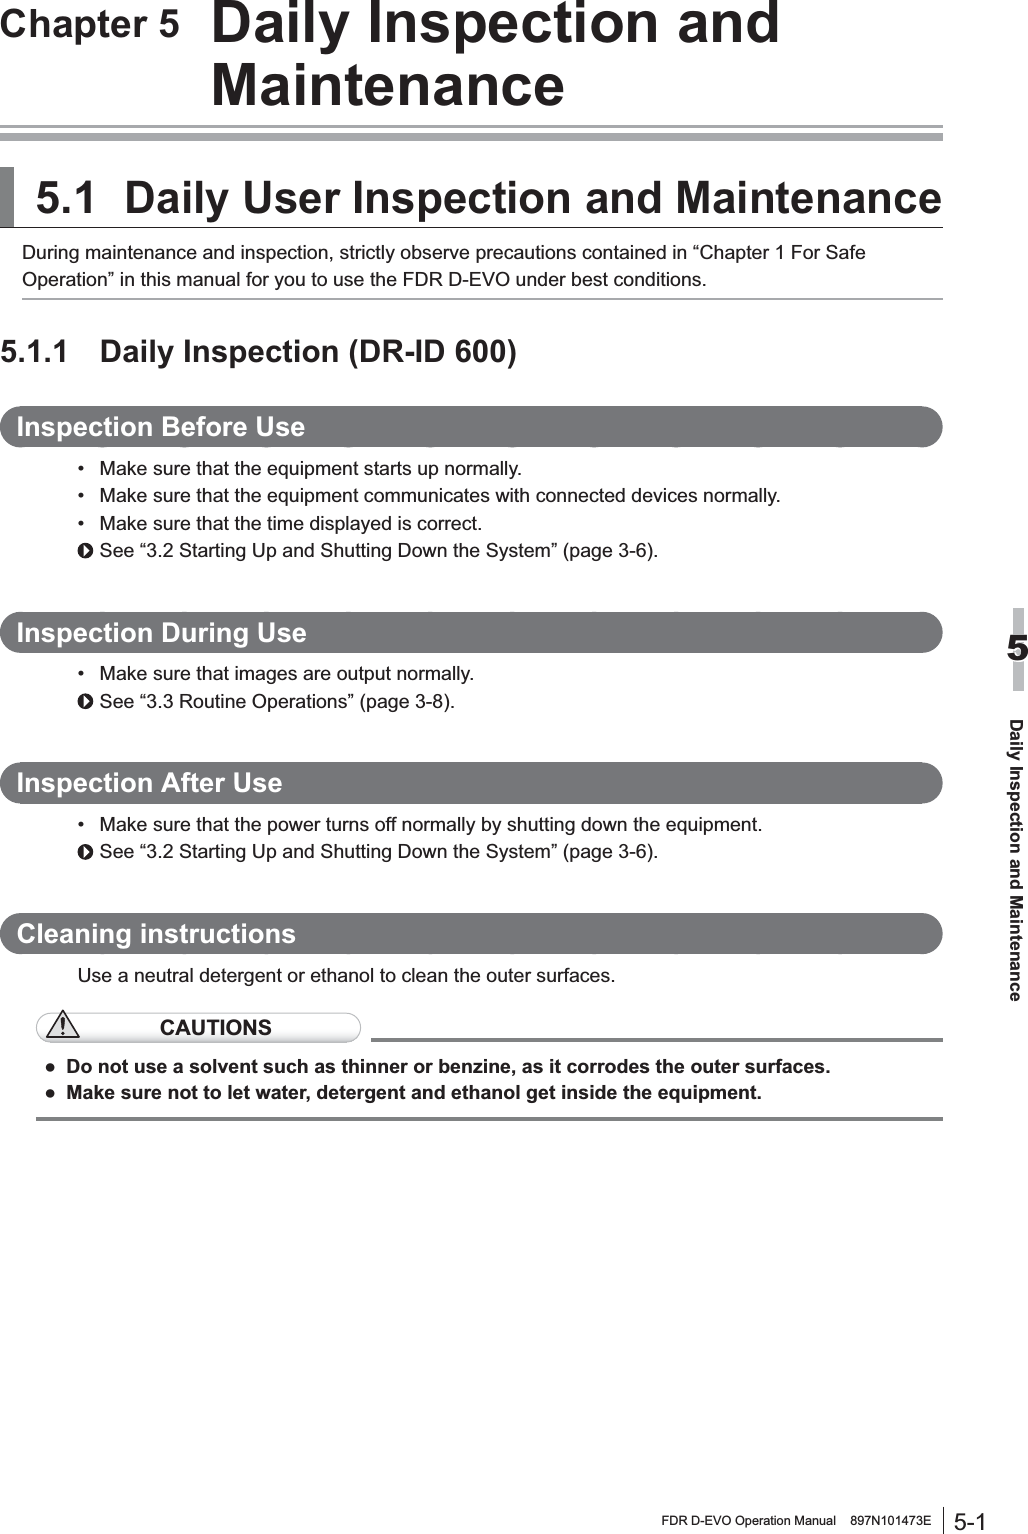 5-1FDR D-EVO Operation Manual    897N101473EDaily Inspection and Maintenance5Chapter 5  Daily Inspection and Maintenance5.1Daily User Inspection and MaintenanceDuring maintenance and inspection, strictly observe precautions contained in “Chapter 1 For Safe Operation” in this manual for you to use the FDR D-EVO under best conditions.5.1.1 Daily Inspection (DR-ID 600)Inspection Before Use 0DNHVXUHWKDWWKHHTXLSPHQWVWDUWVXSQRUPDOO\ 0DNHVXUHWKDWWKHHTXLSPHQWFRPPXQLFDWHVZLWKFRQQHFWHGGHYLFHVQRUPDOO\ 0DNHVXUHWKDWWKHWLPHGLVSOD\HGLVFRUUHFWSee “3.2 Starting Up and Shutting Down the System” (page 3-6).,QVSHFWLRQ&apos;XULQJ8VH 0DNHVXUHWKDWLPDJHVDUHRXWSXWQRUPDOO\See “3.3 Routine Operations” (page 3-8).Inspection After Use 0DNHVXUHWKDWWKHSRZHUWXUQVRIIQRUPDOO\E\VKXWWLQJGRZQWKHHTXLSPHQWSee “3.2 Starting Up and Shutting Down the System” (page 3-6).&amp;OHDQLQJLQVWUXFWLRQVUse a neutral detergent or ethanol to clean the outer surfaces. CAUTIONSƔ Do not use a solvent such as thinner or benzine, as it corrodes the outer surfaces.Ɣ 0DNHVXUHQRWWROHWZDWHUGHWHUJHQWDQGHWKDQROJHWLQVLGHWKHHTXLSPHQW